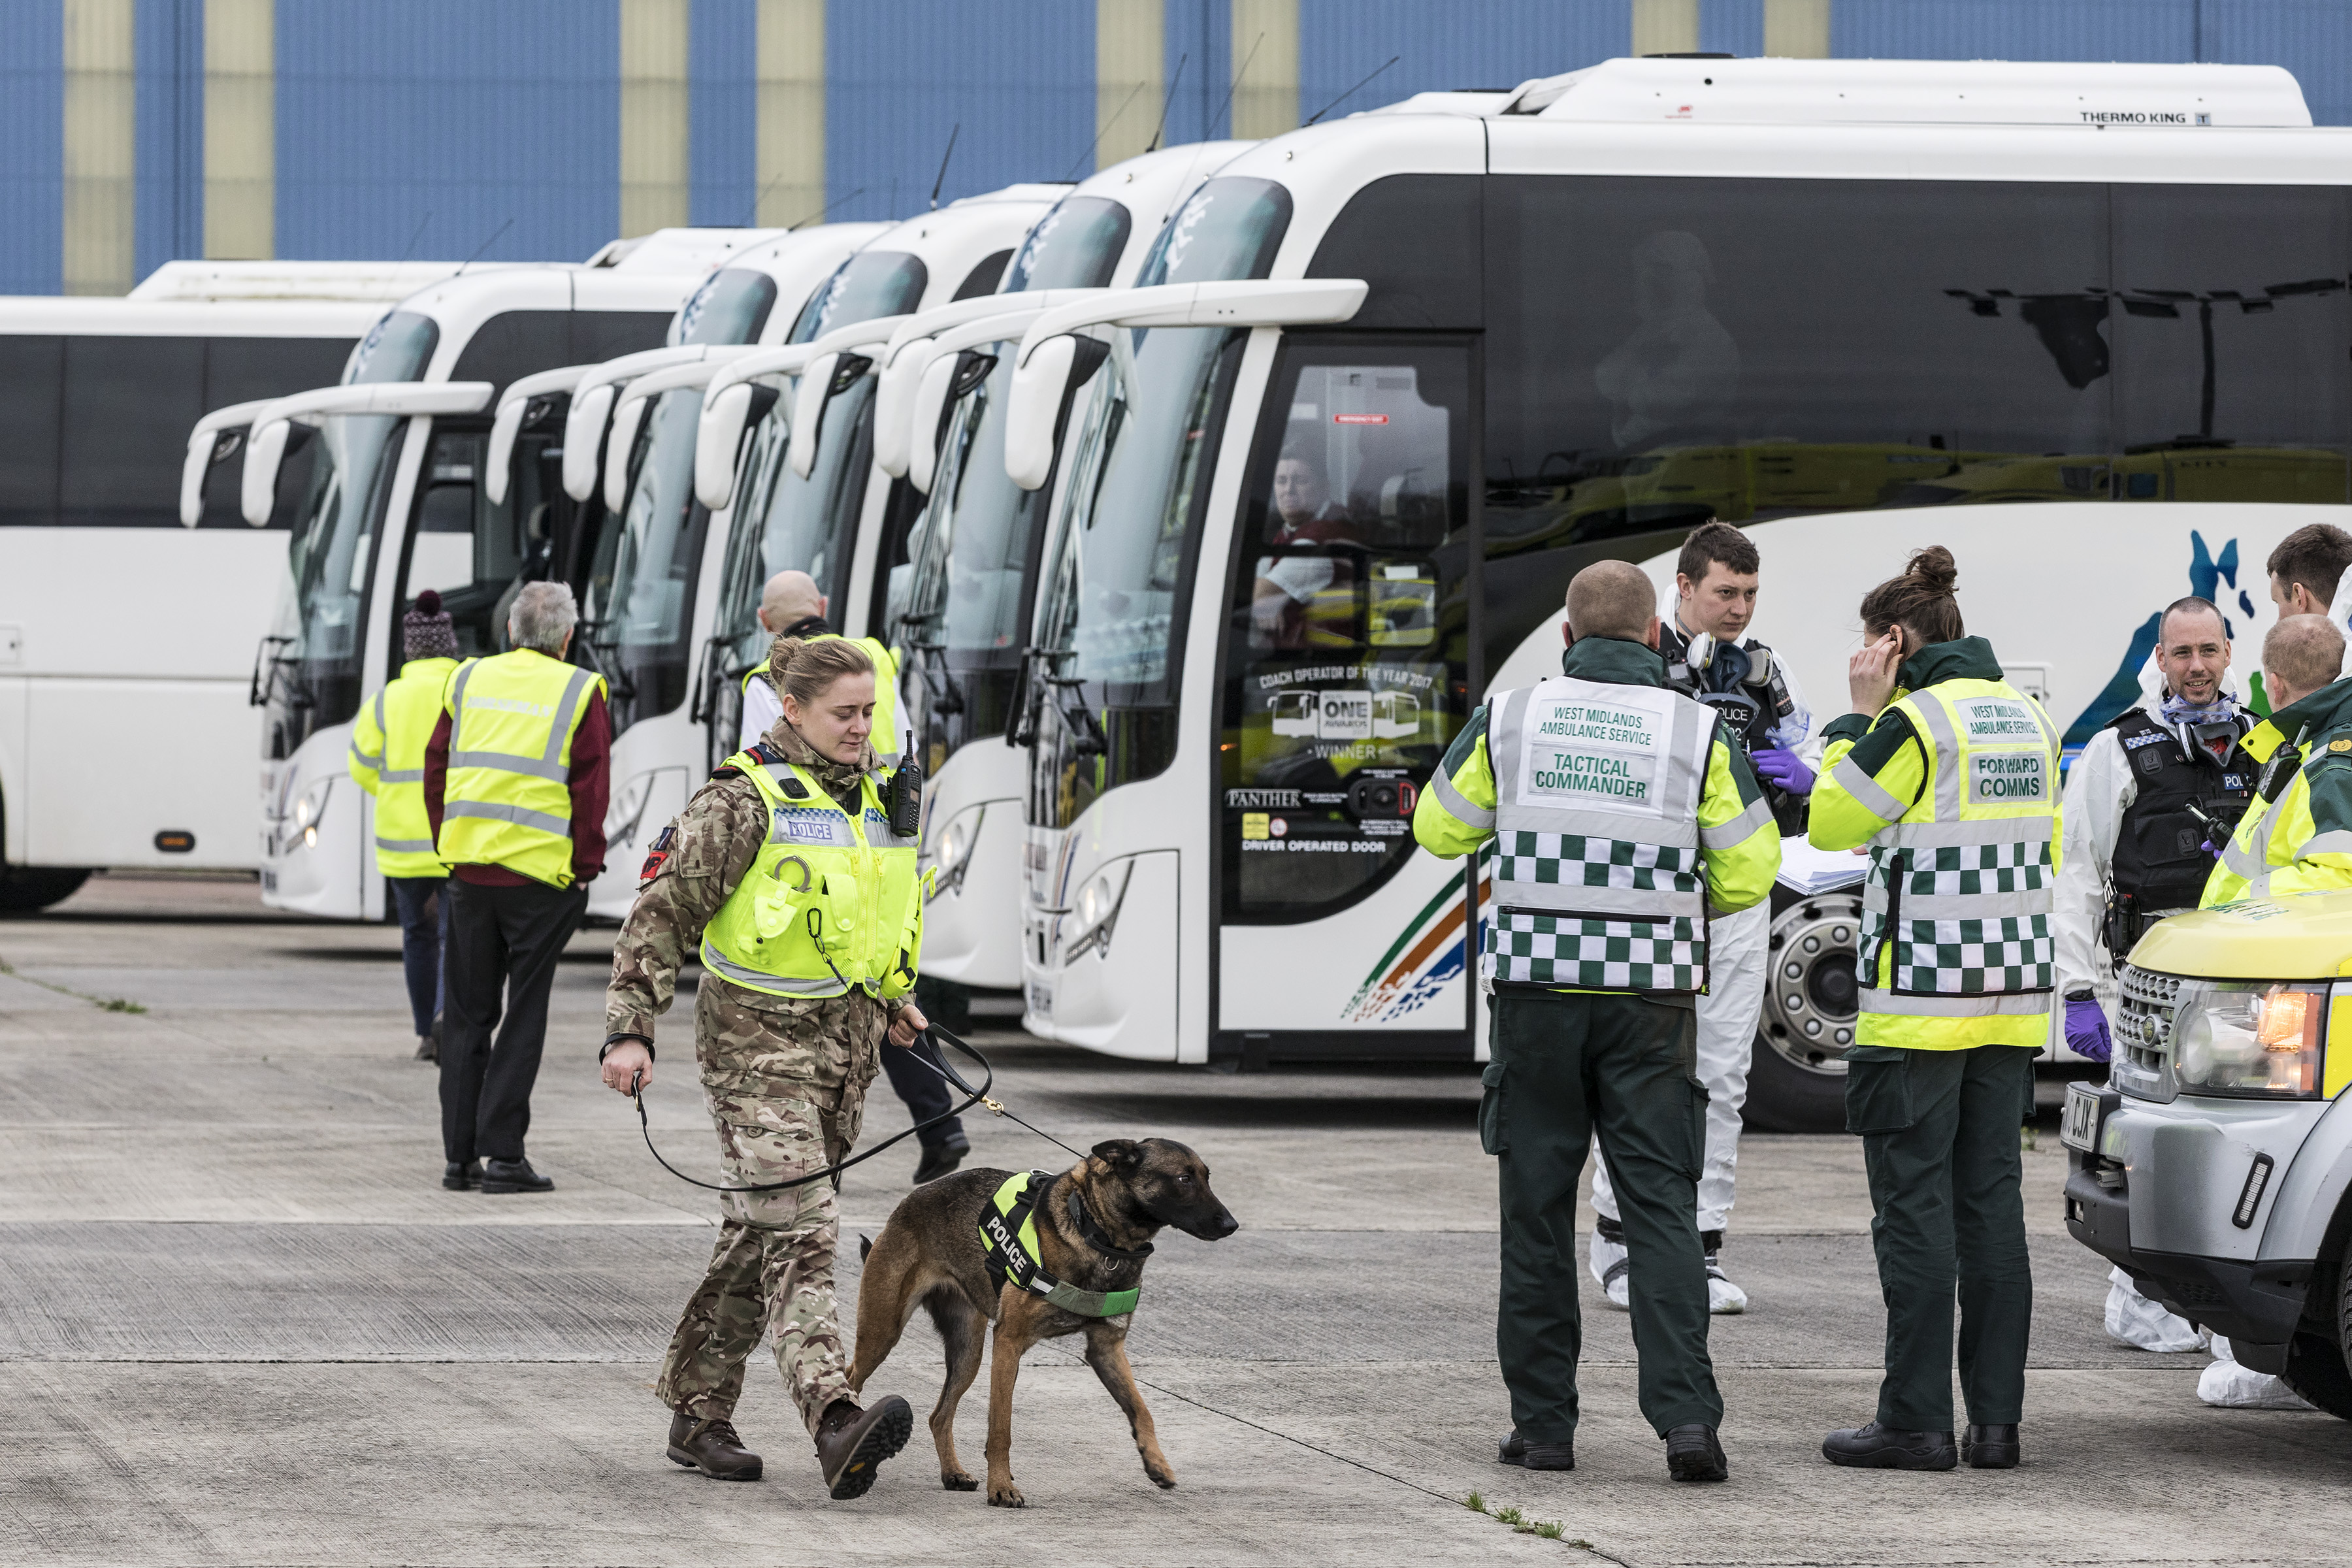 RAF Police walks dog around coaches and emergency personnel and vehicles.